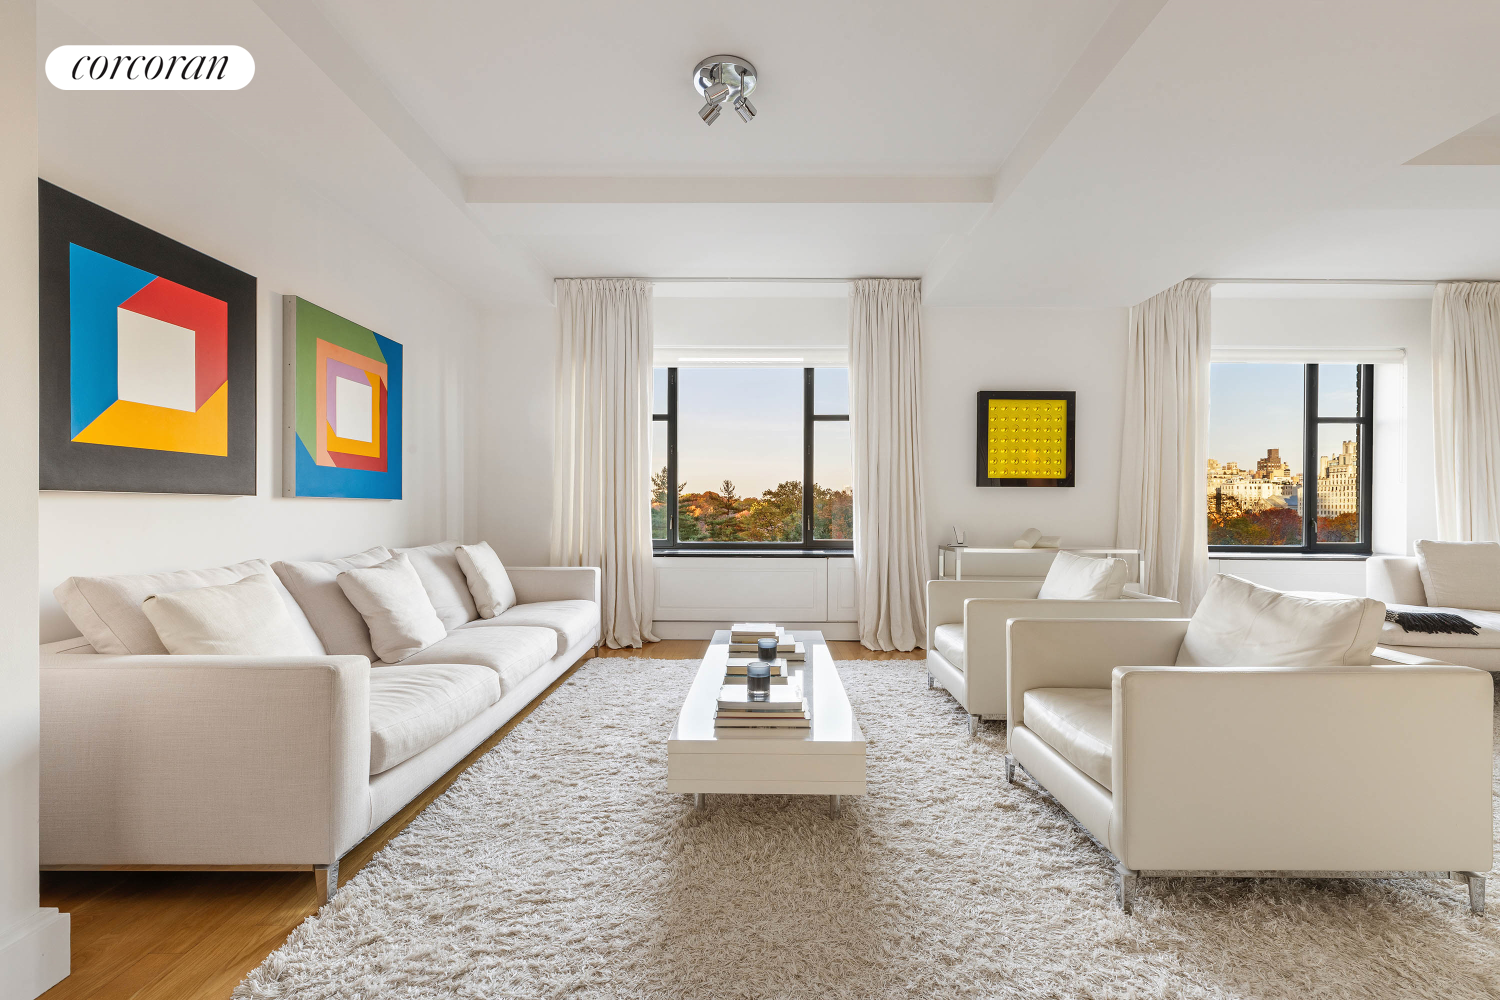 110 Central Park 8B, Central Park South, Midtown West, NYC - 3 Bedrooms  
3.5 Bathrooms  
6 Rooms - 